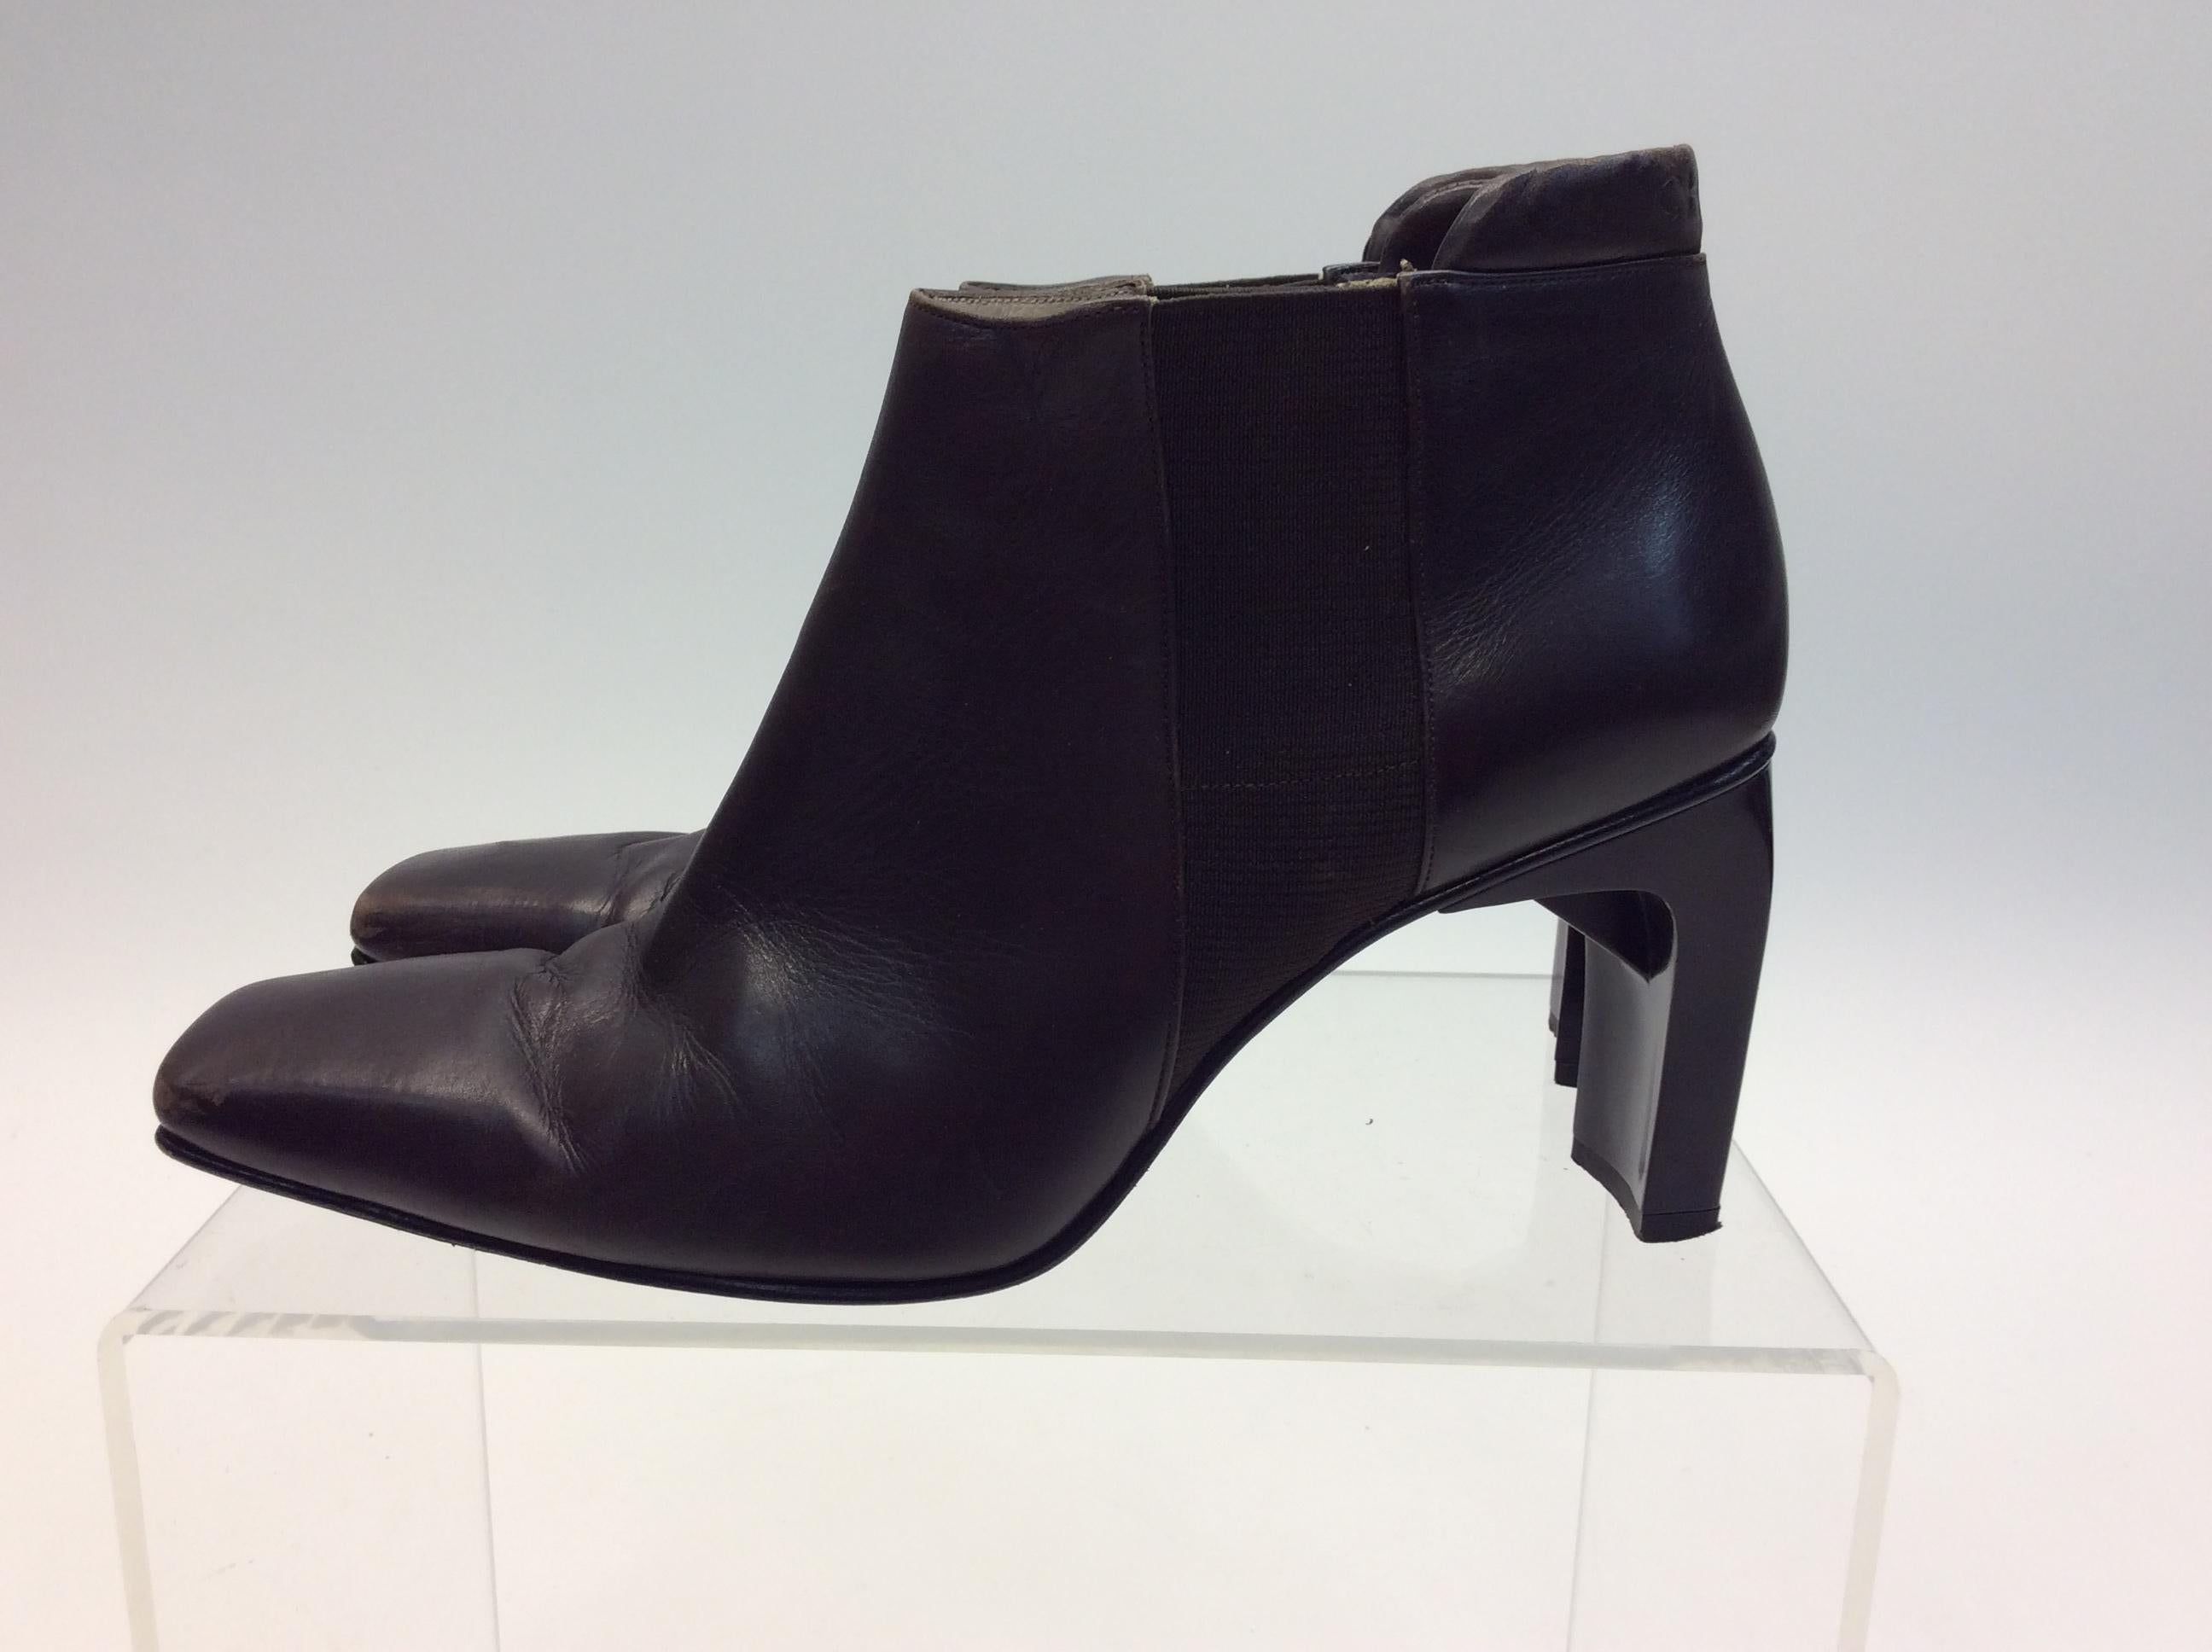 Chanel Brown Leather Bootie
$165
Made in France
Size 37.5
3